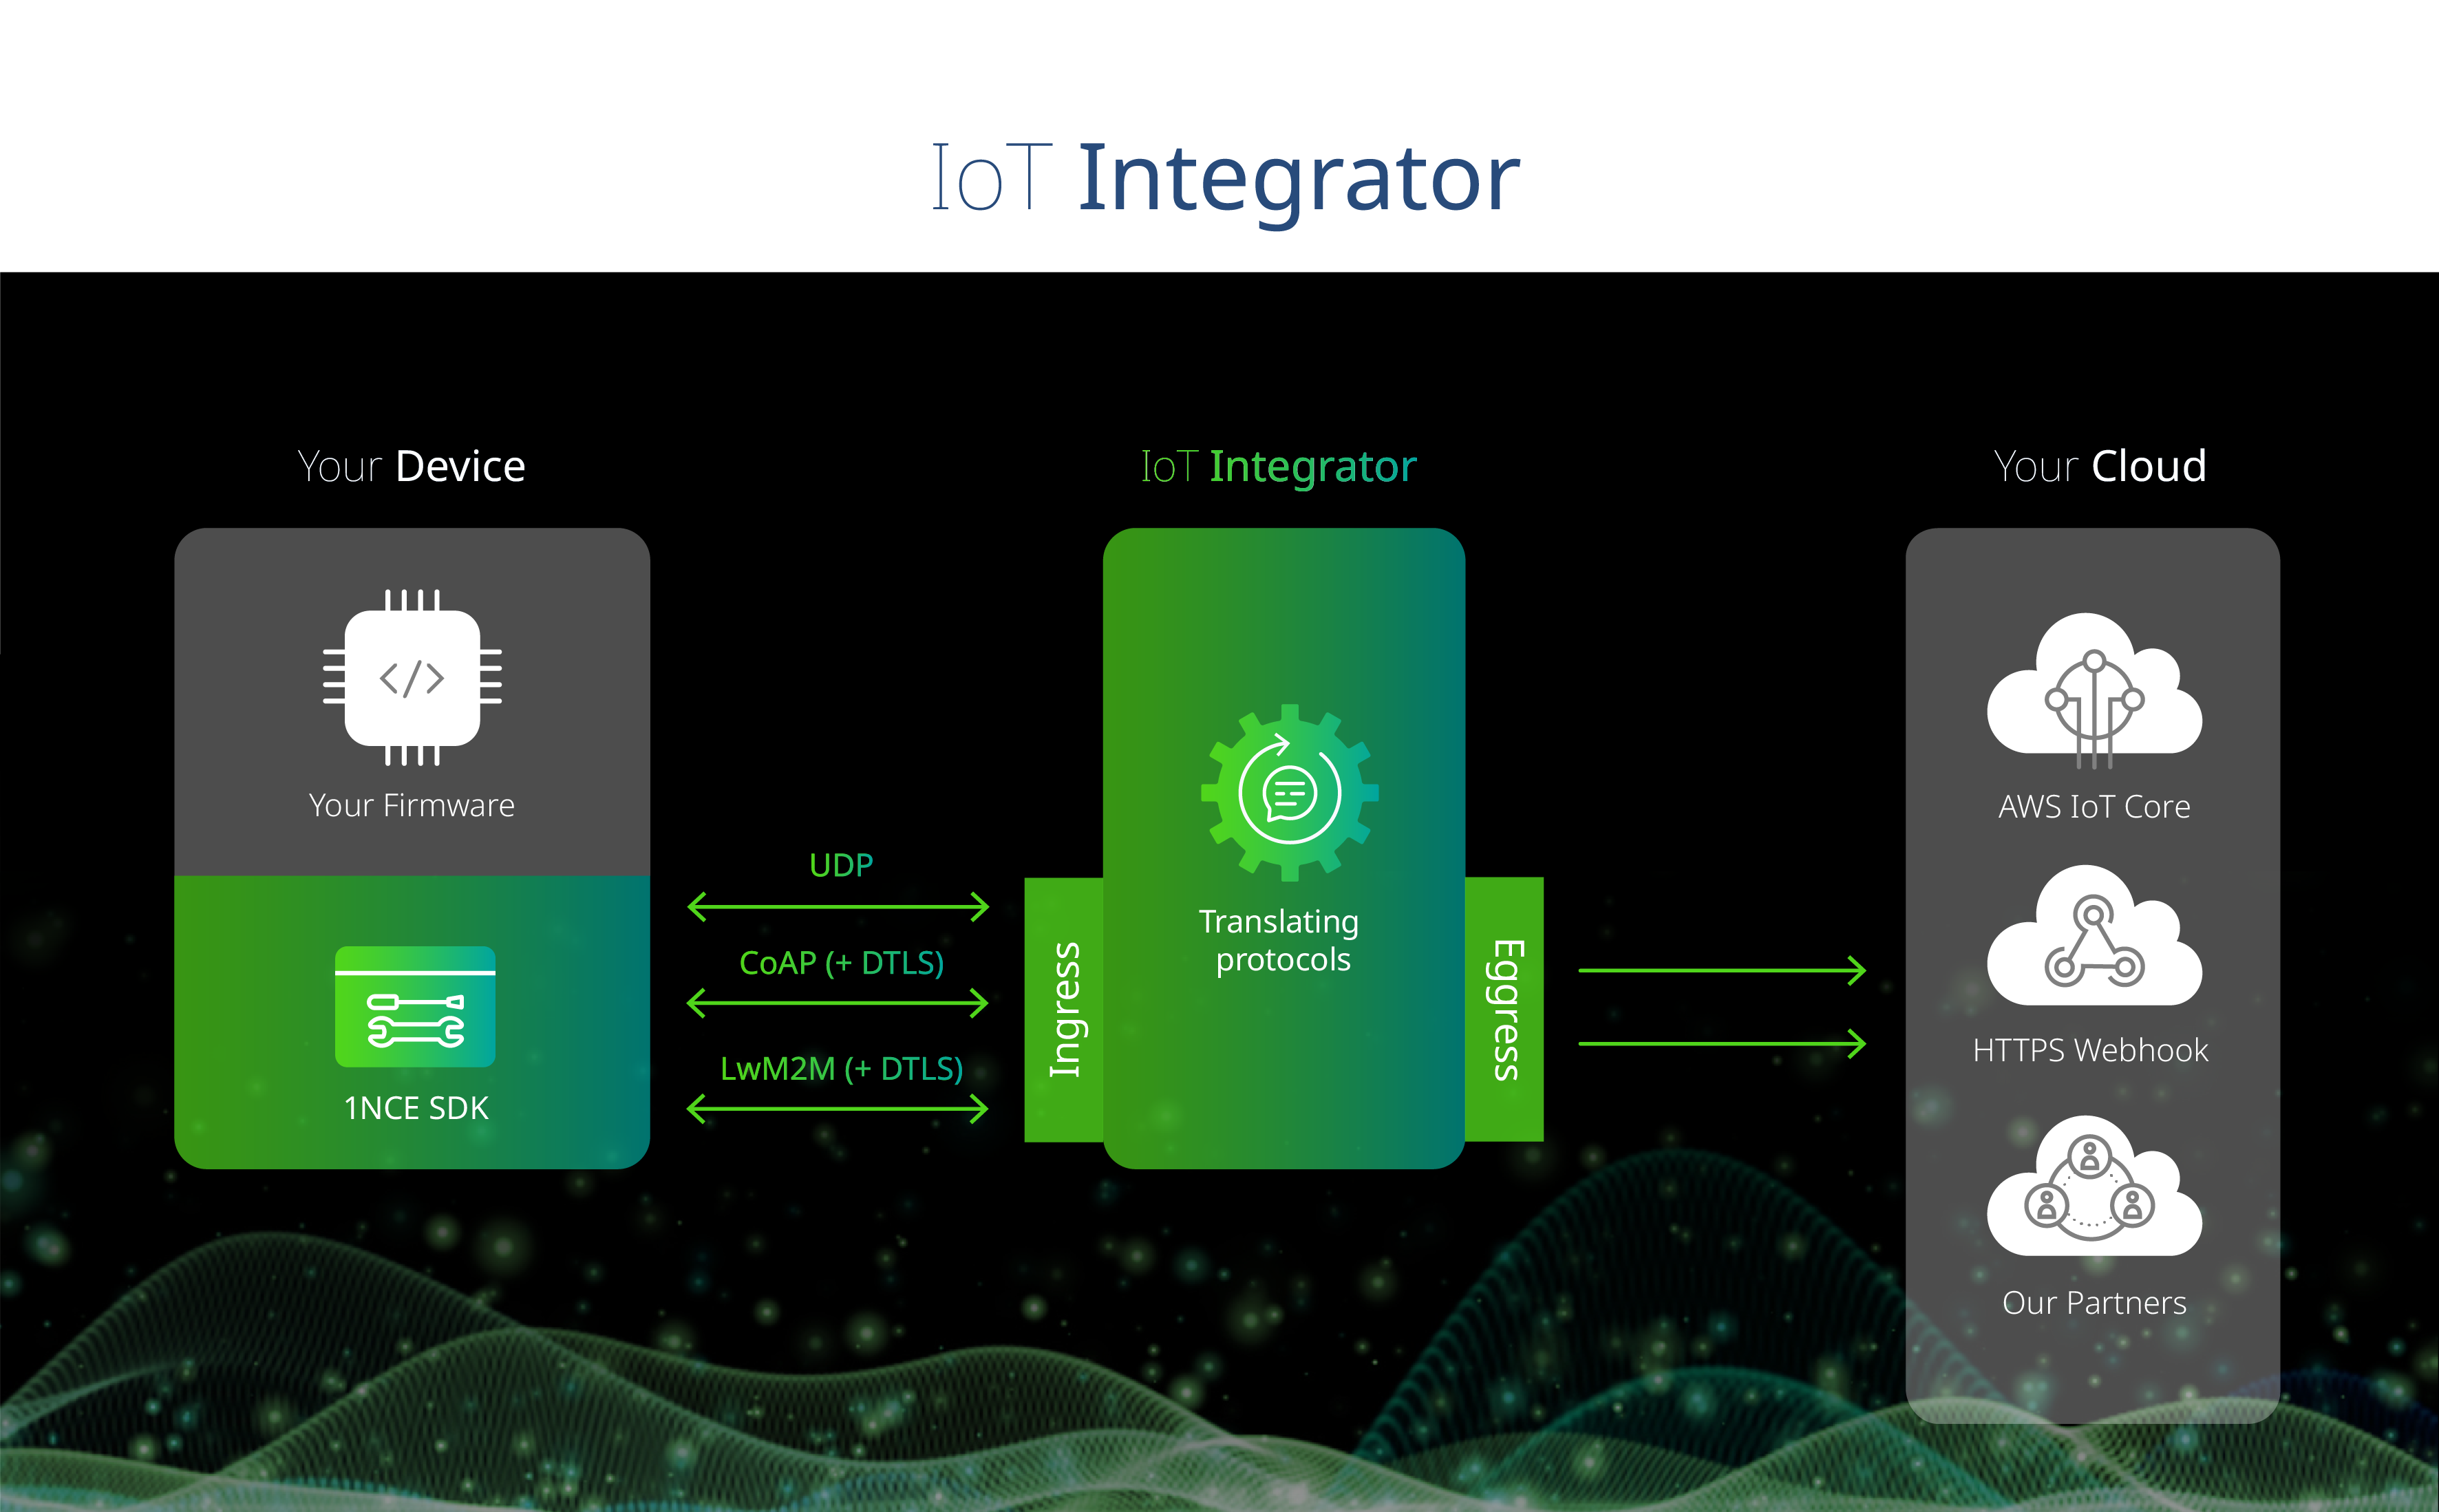 Device Integrator as part of the IoT Integrator